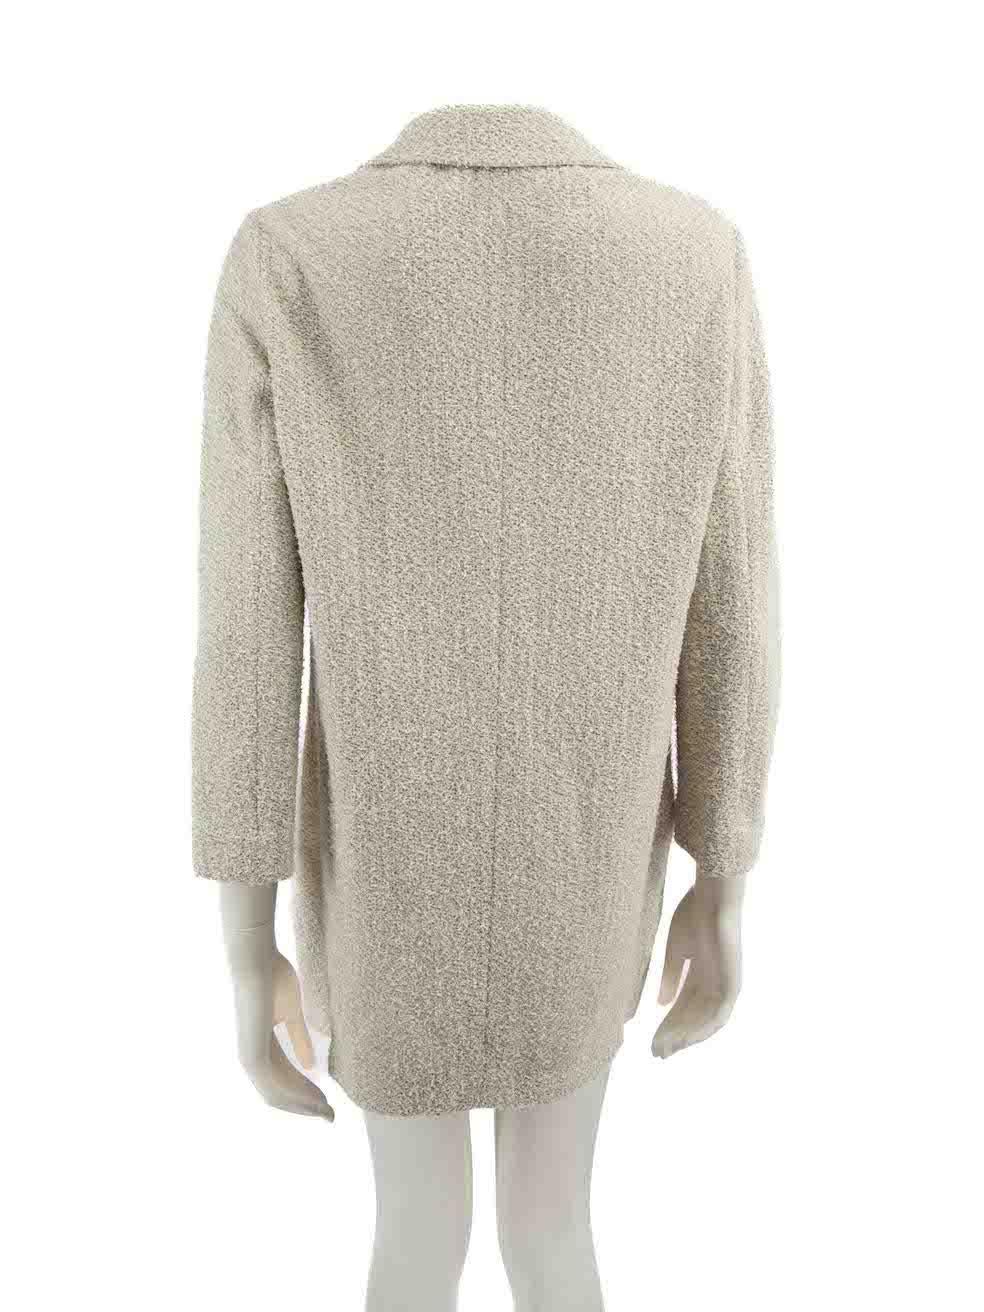 Fabiana Filippi Grey Single Breasted Woven Coat Size S In Excellent Condition For Sale In London, GB